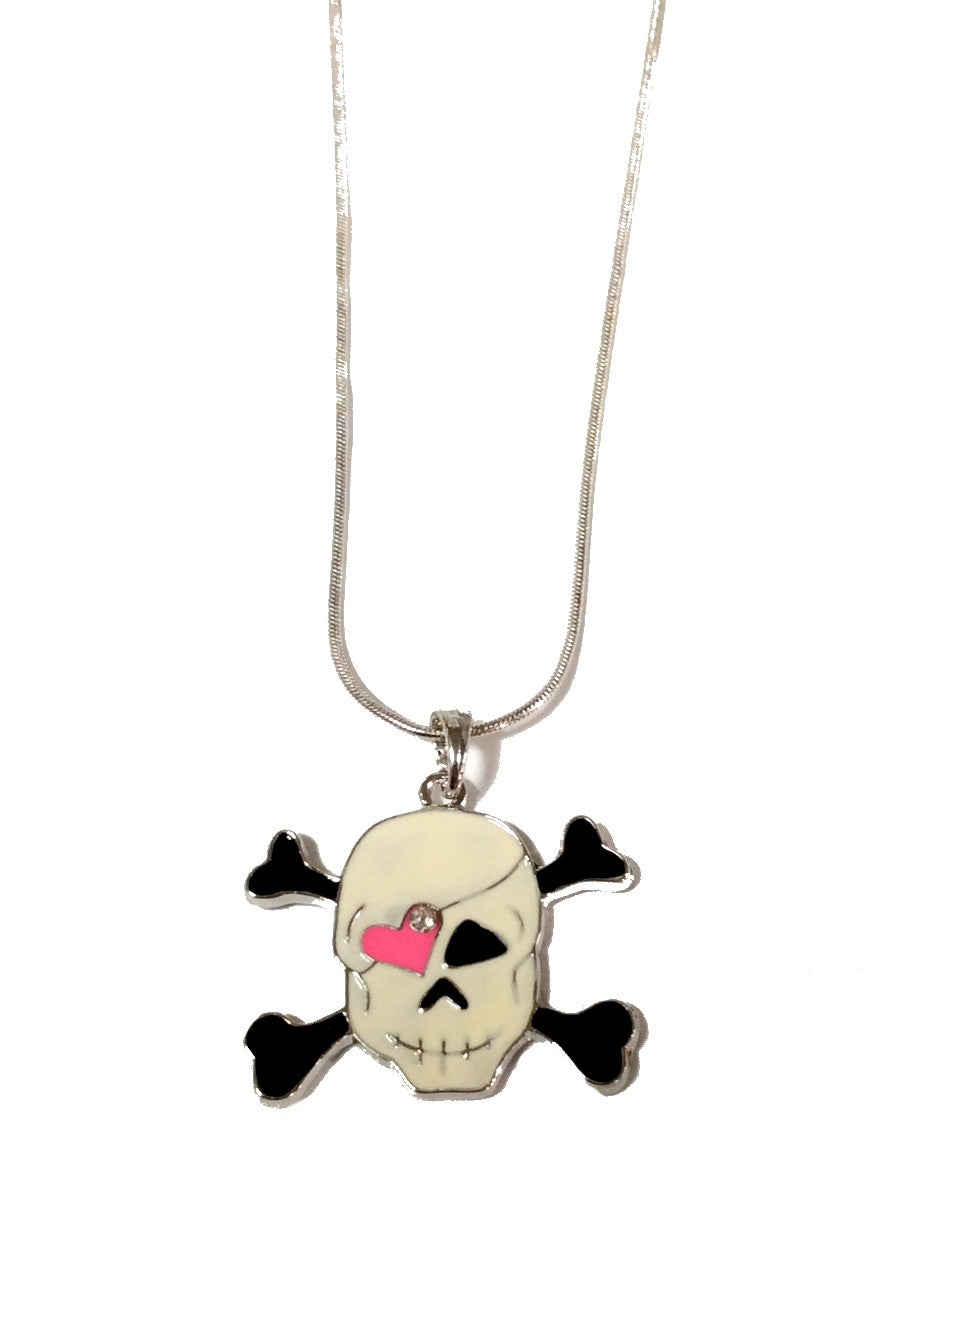 Pirate Necklace #27-2642